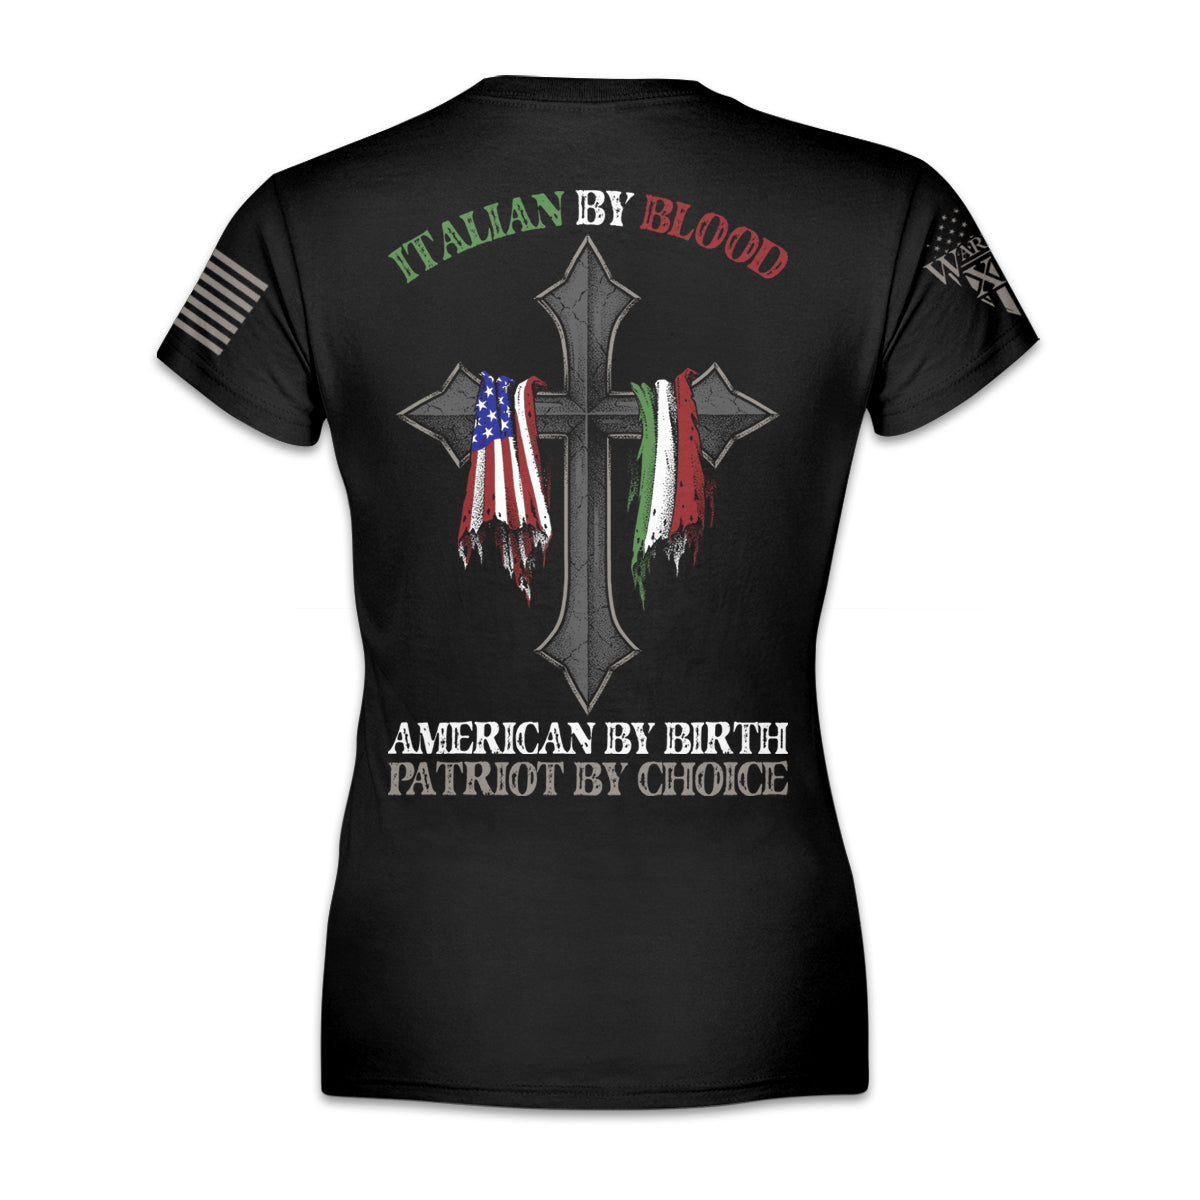 Italian By Blood - Women's Relaxed Fit